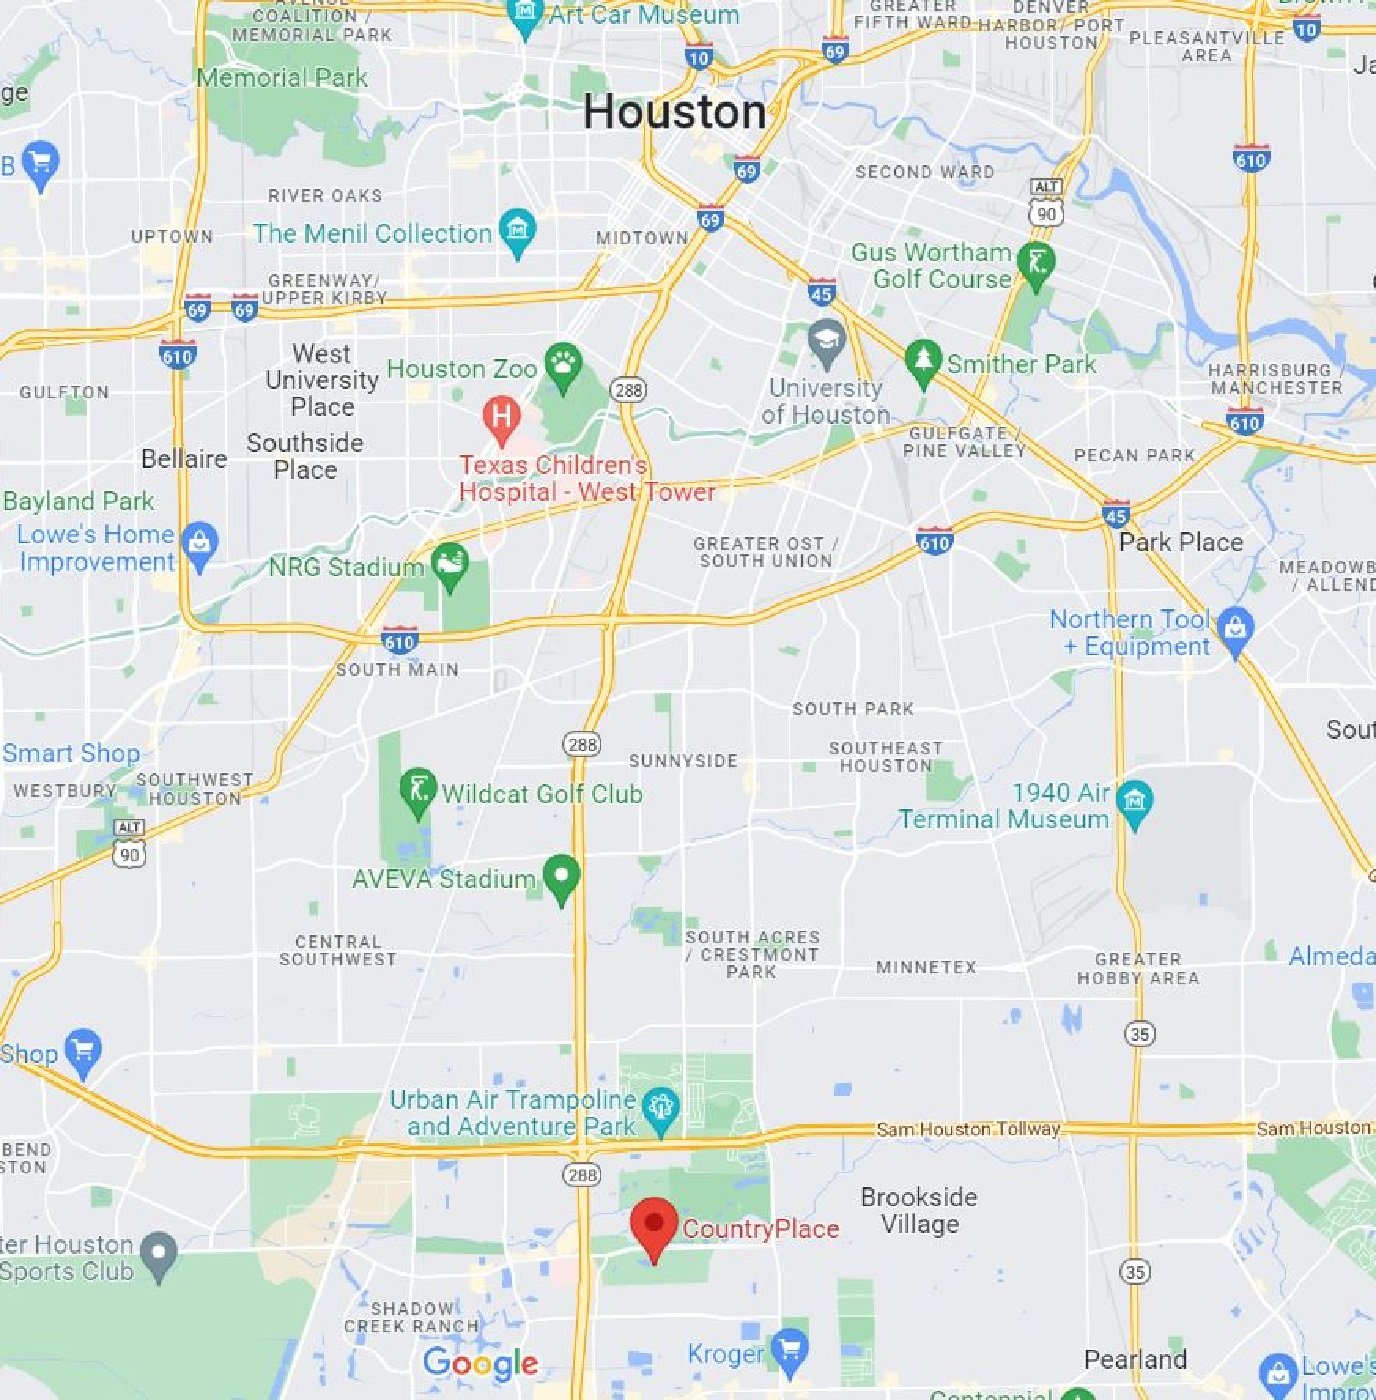 Pearland: CountryPlace Map